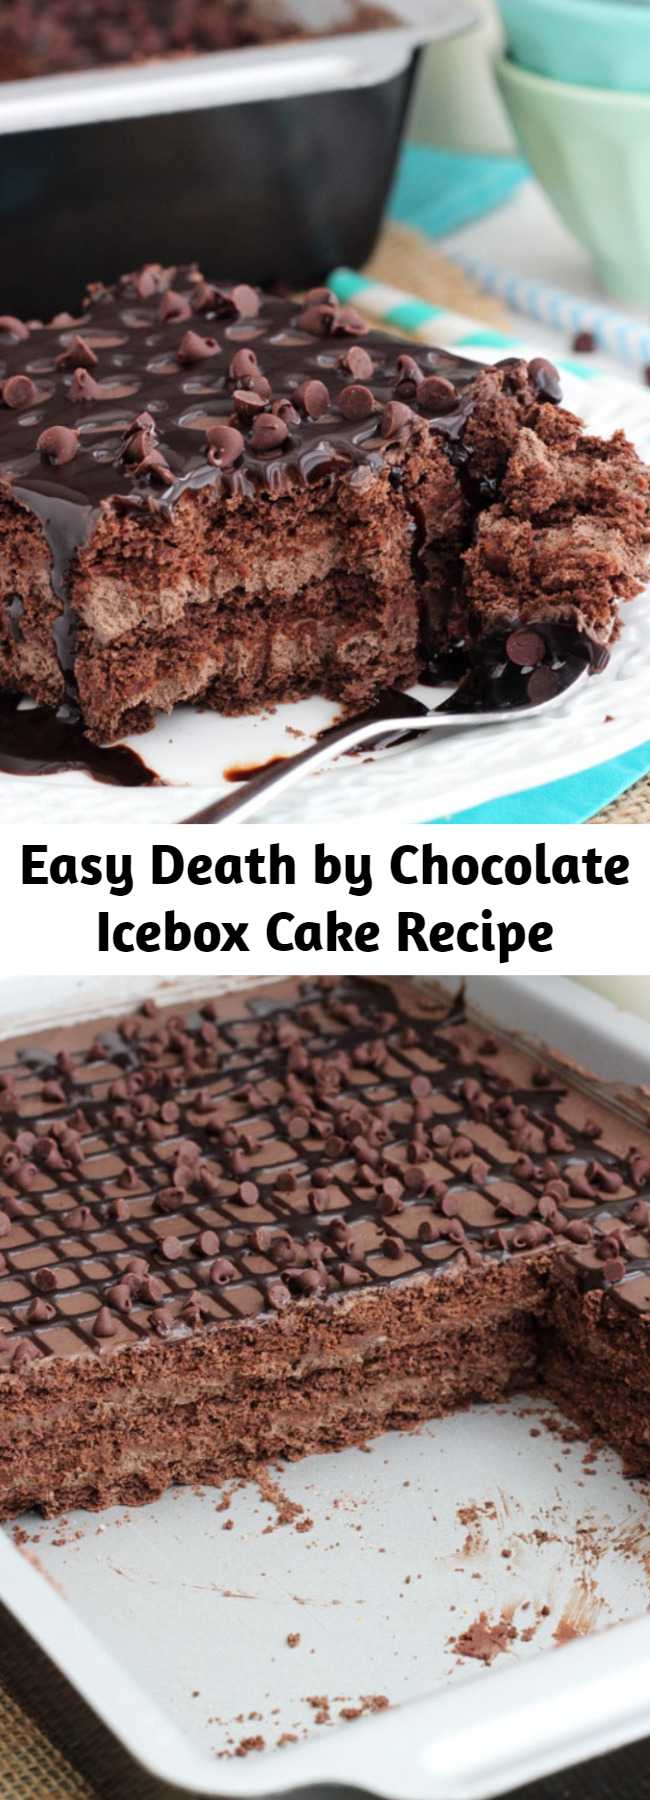 Easy Death by Chocolate Icebox Cake Recipe - This Death by Chocolate Icebox Cake was a huge hit! Layers of chocolate ganache, chocolate mousse and chocolate graham crackers are topped with chocolate sauce for a decadent treat that’ll put you in a chocolate coma!